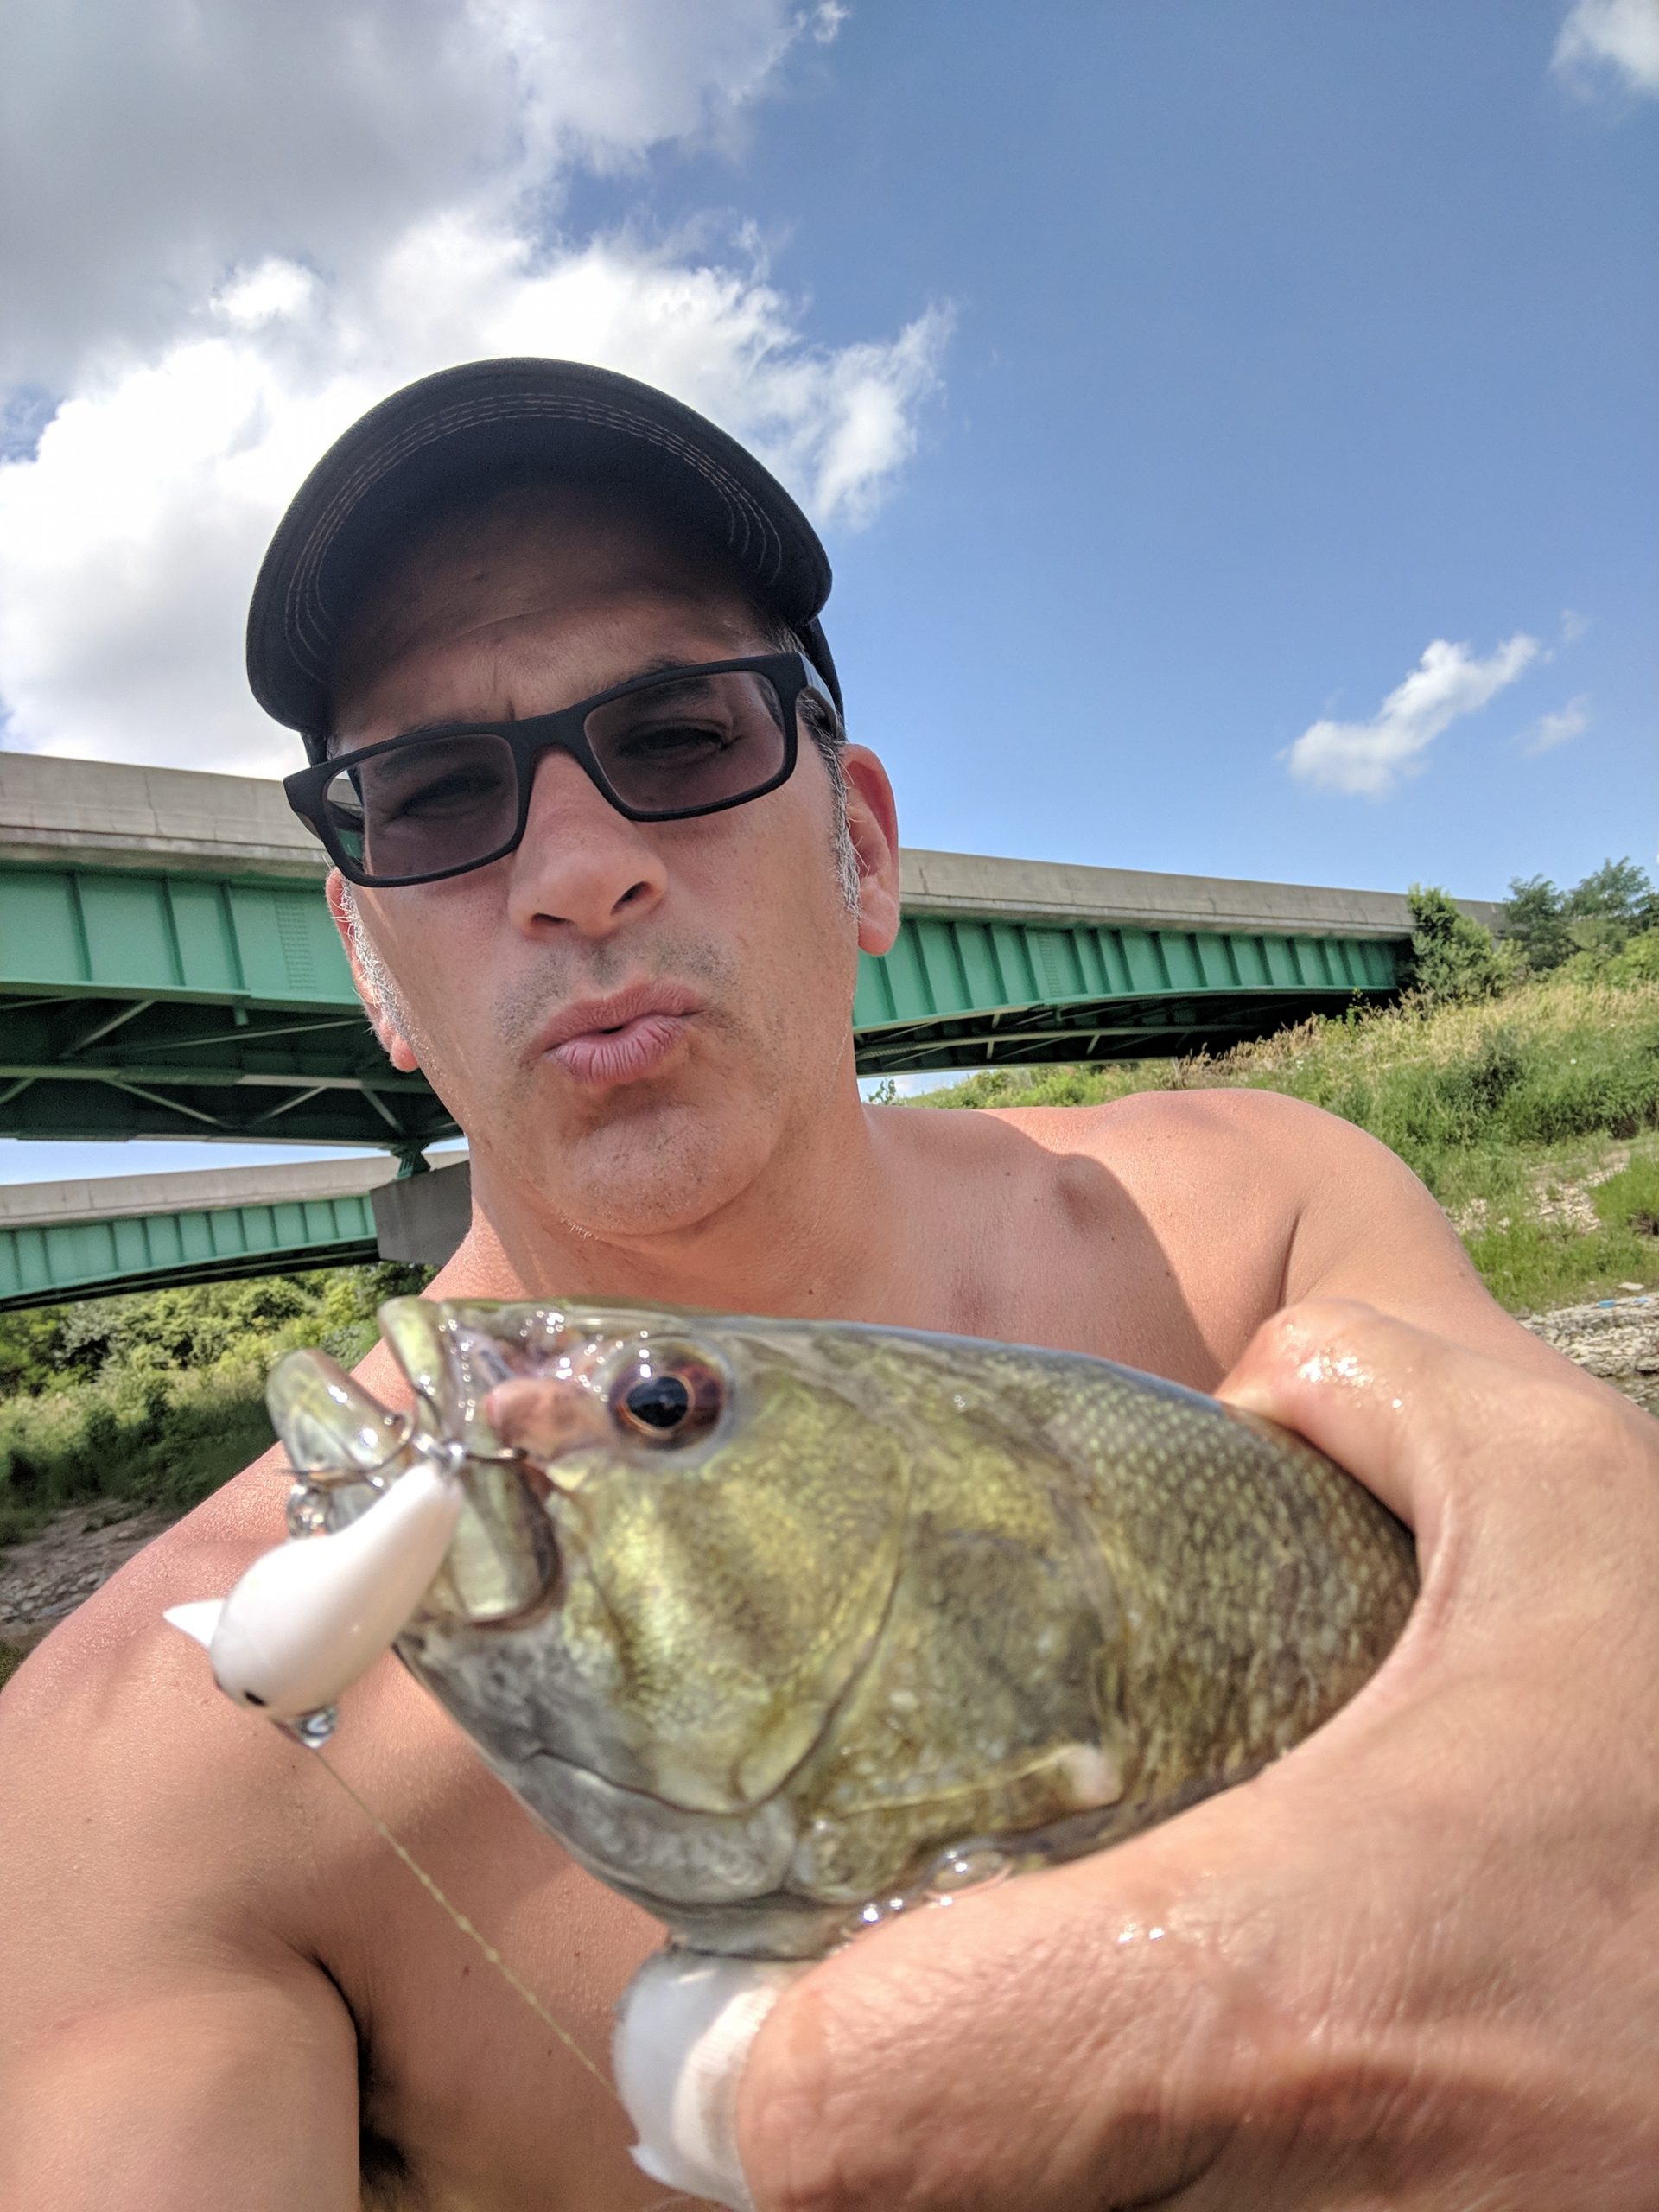 Maumee river conditions. 16 July 2019